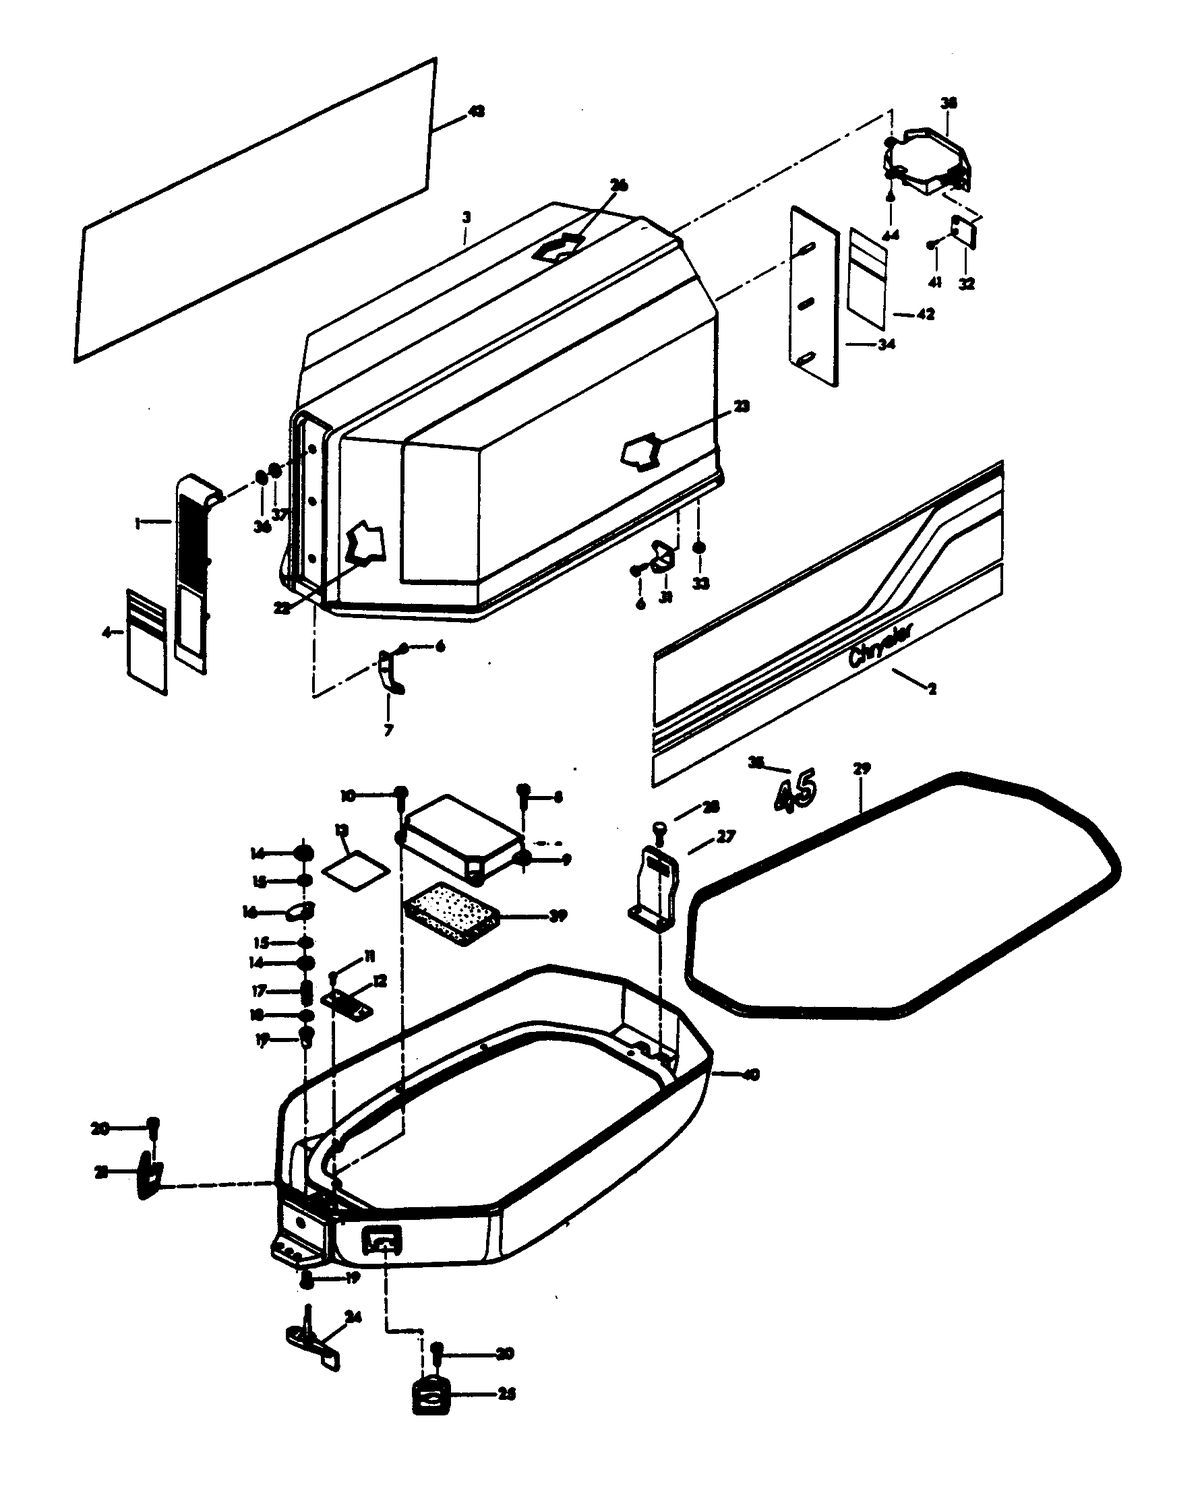 CHRYSLER 45 H.P. ENGINE COVER AND SUPPORT PLATE